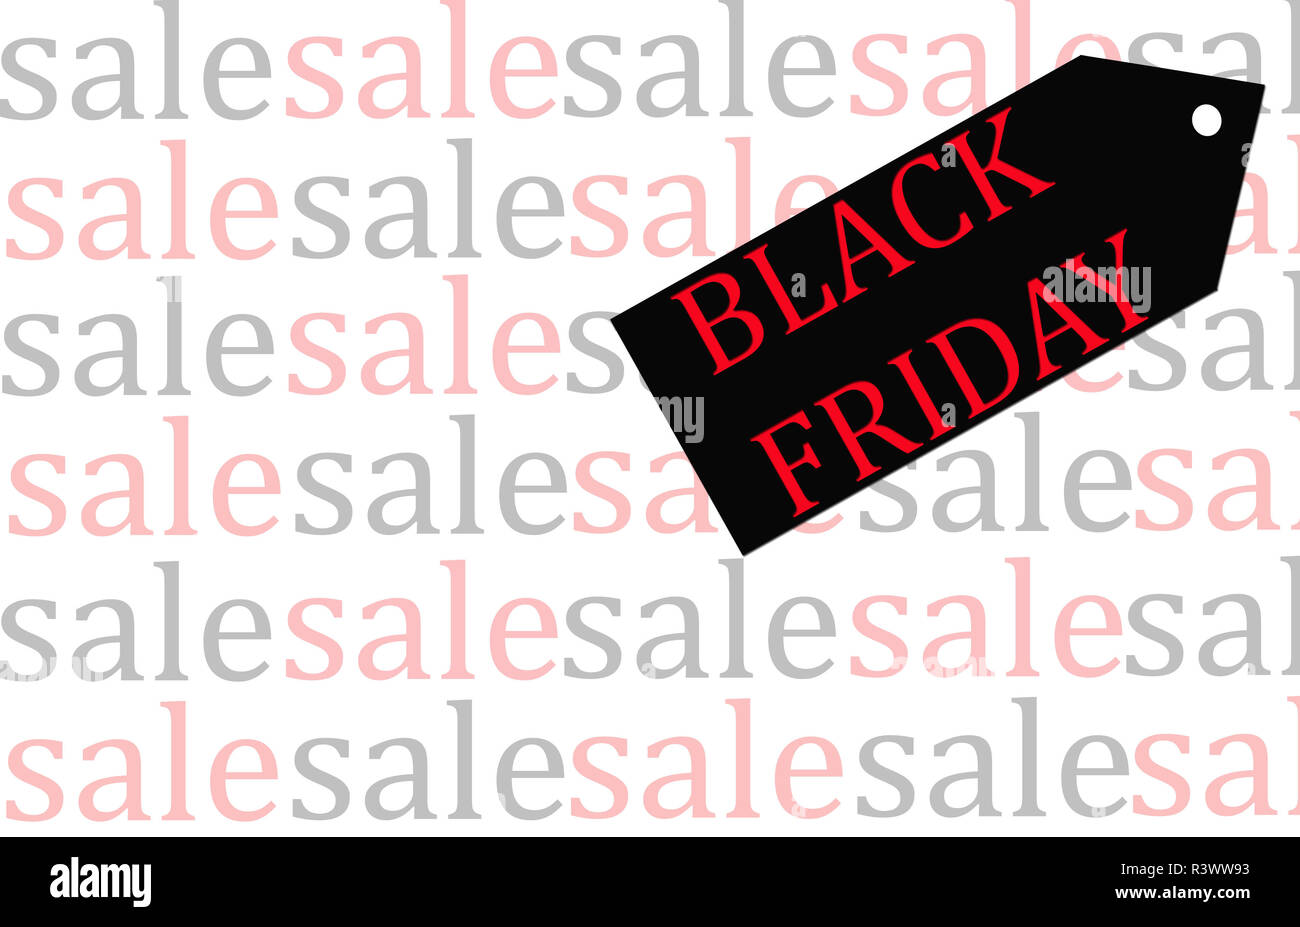 Black Label With The Words Black Friday White Background With The Word Sale Written Over And Over Again In Black And Red Stock Photo Alamy